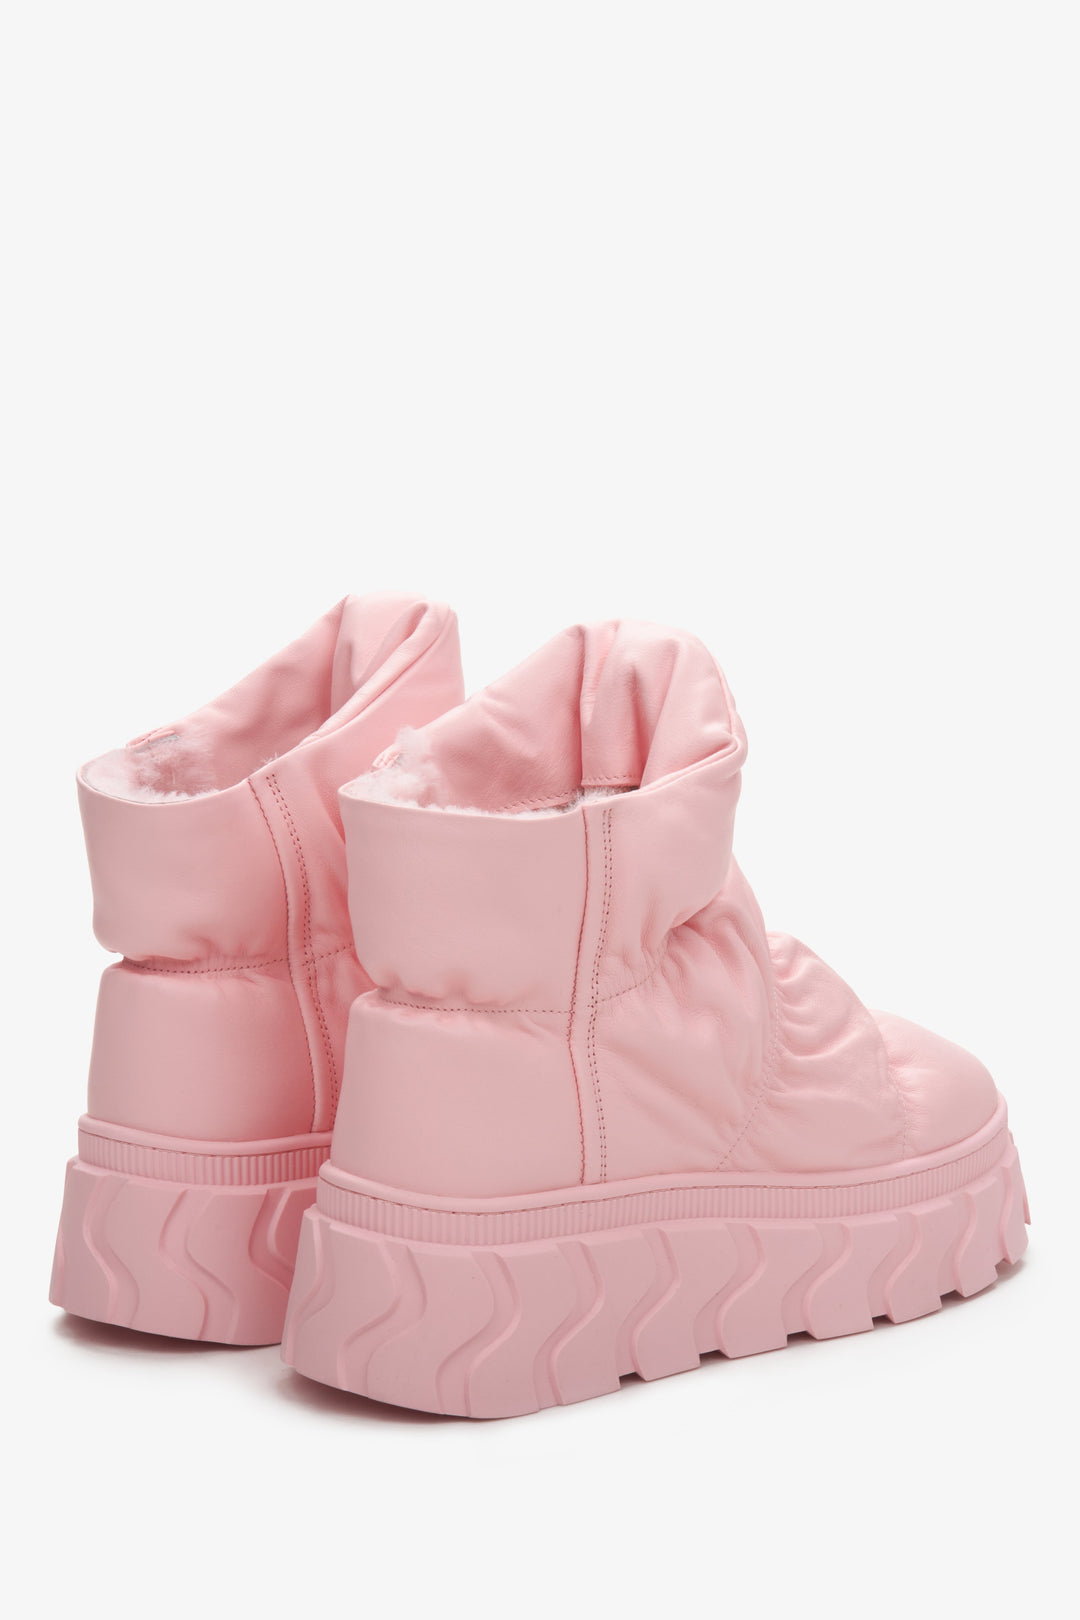 Women's warm and cozy pink snow boots Estro - a close-up on shoe toe.